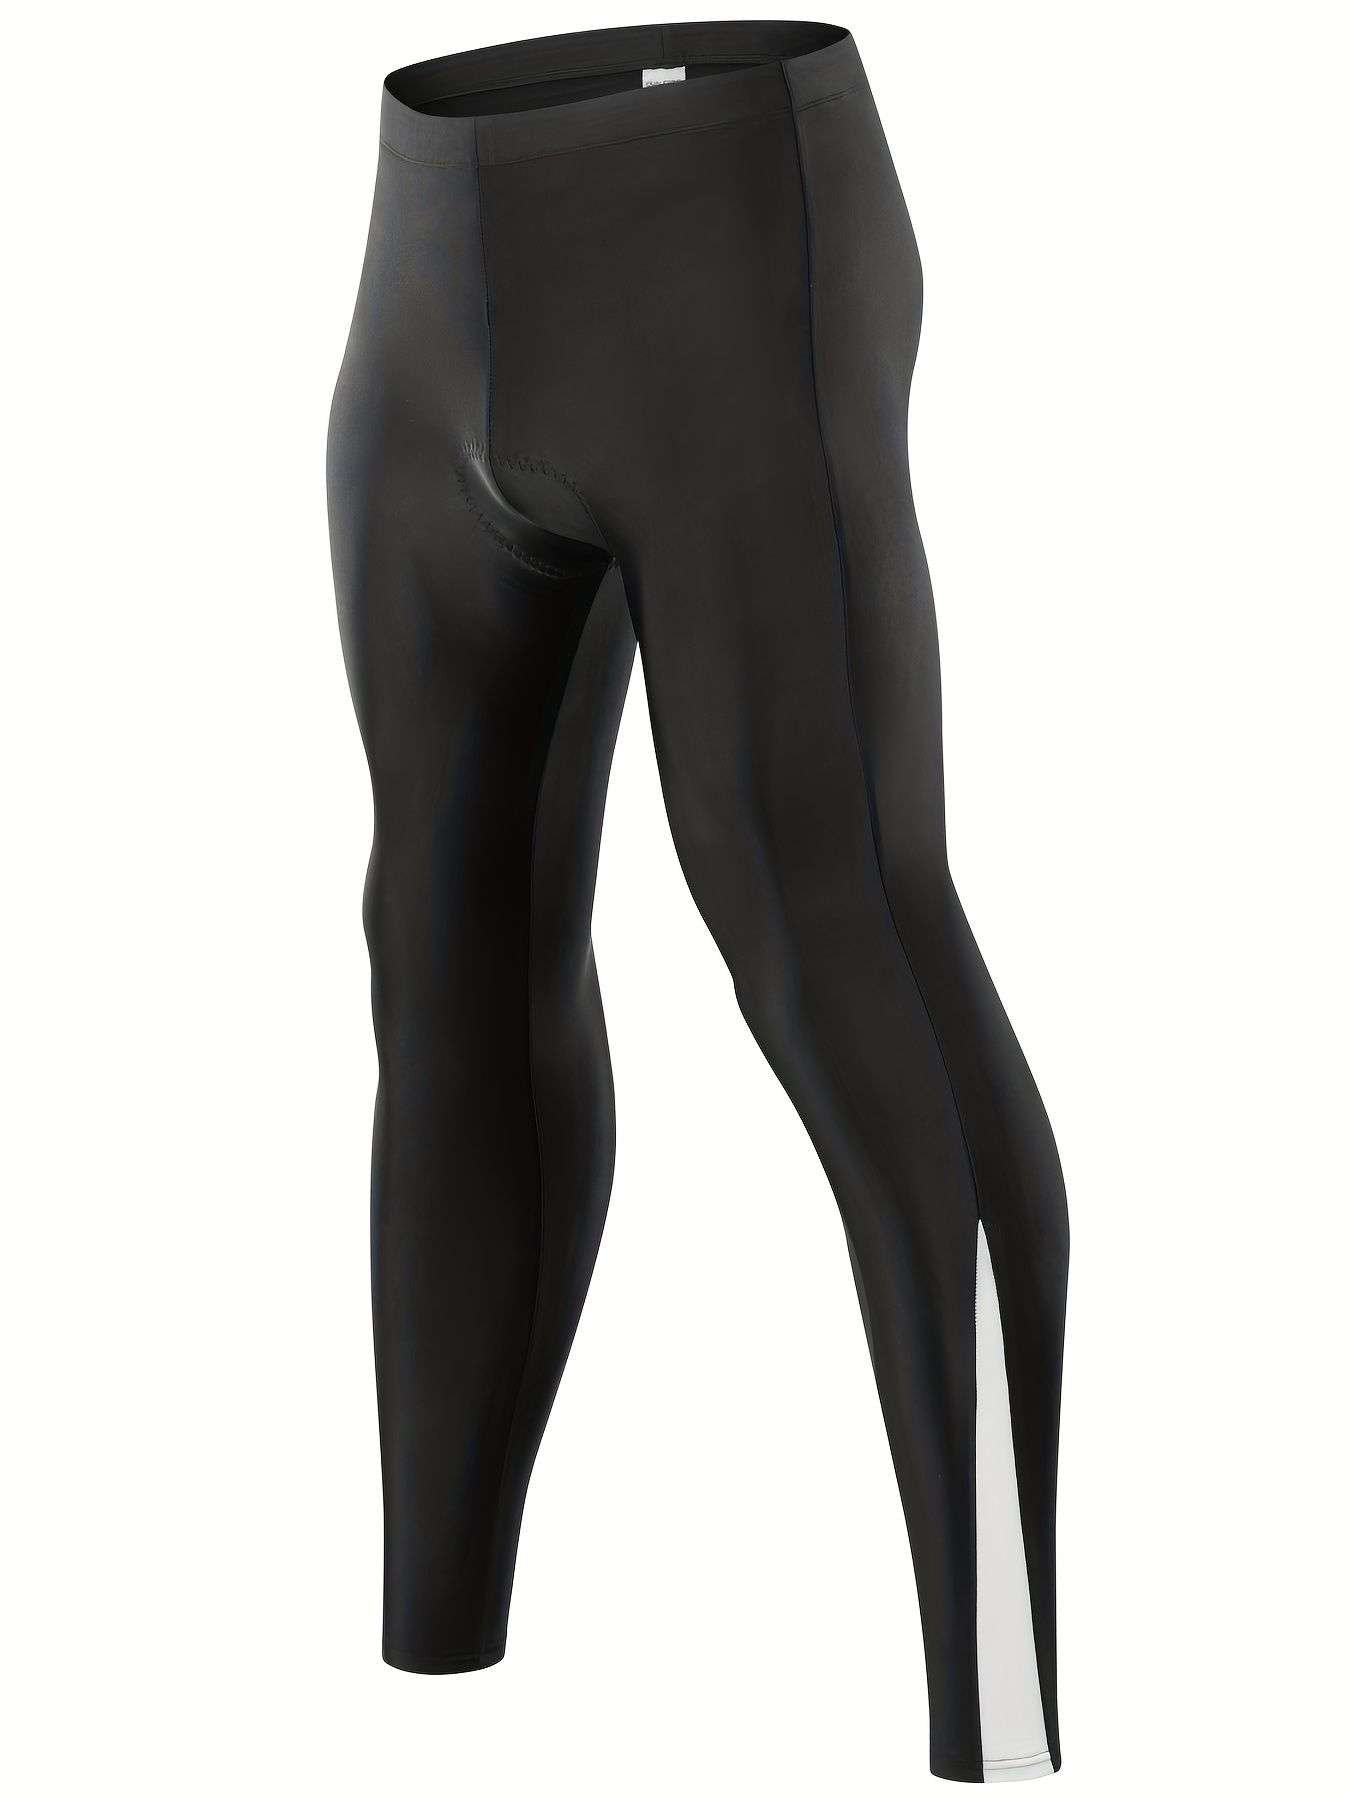 Buy FDX Men's Cycling Tights, Lightweight, Breathable, 3D Padded